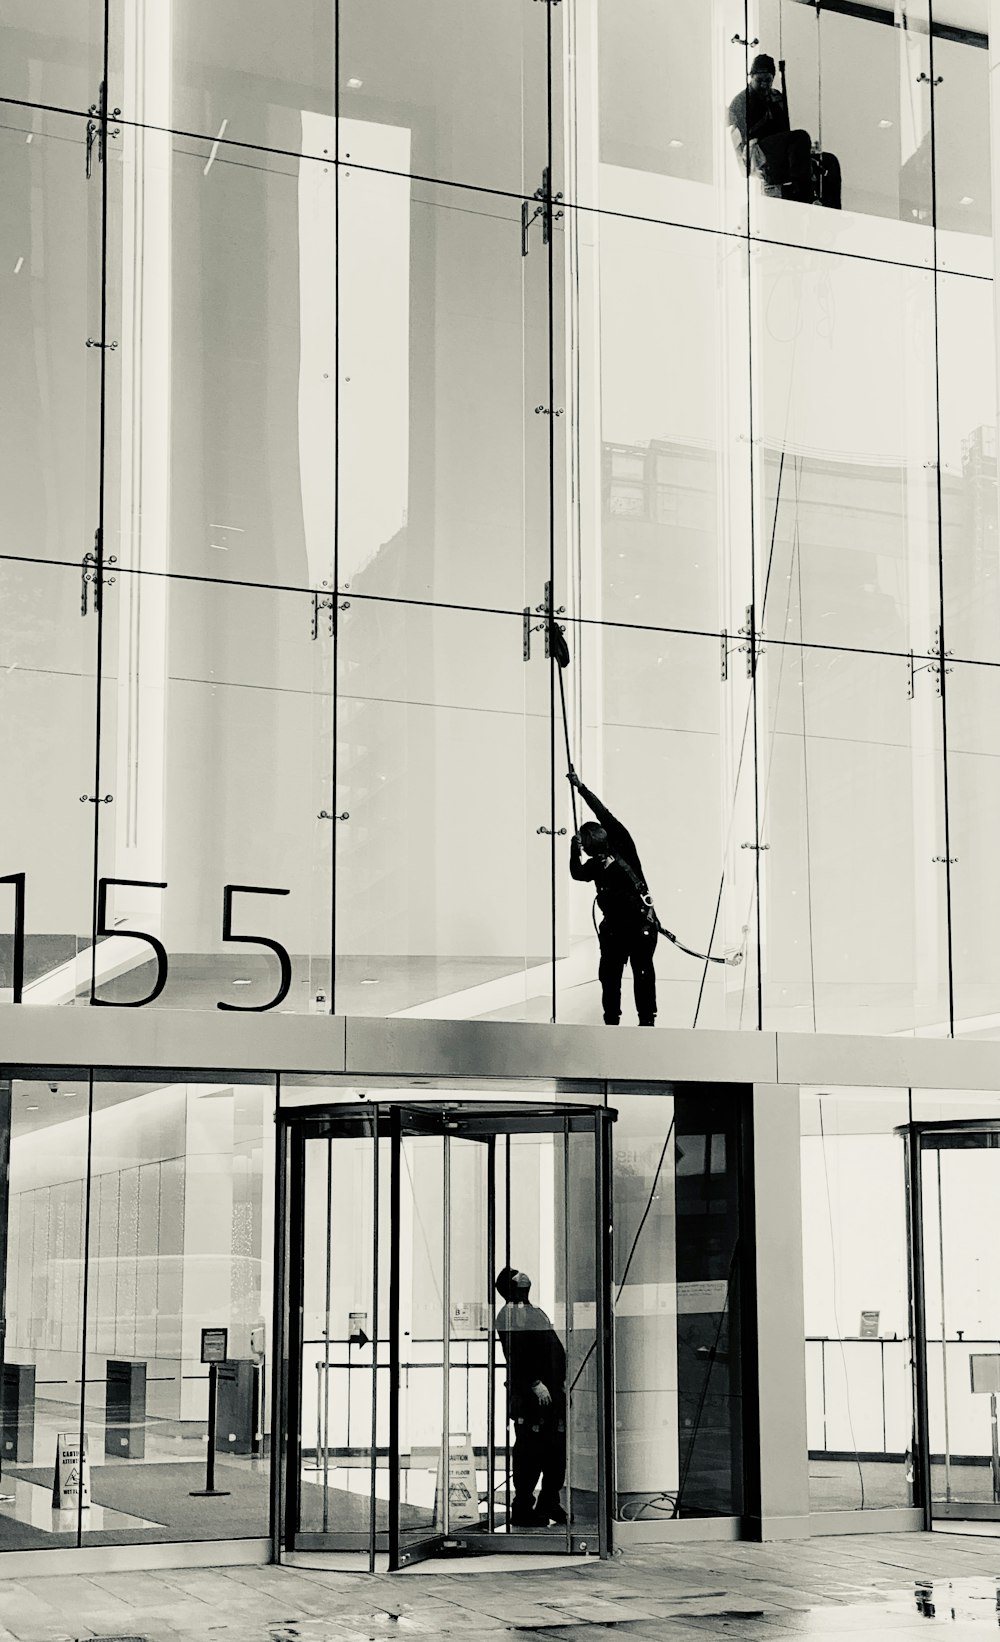 man in black jacket and pants standing on glass window